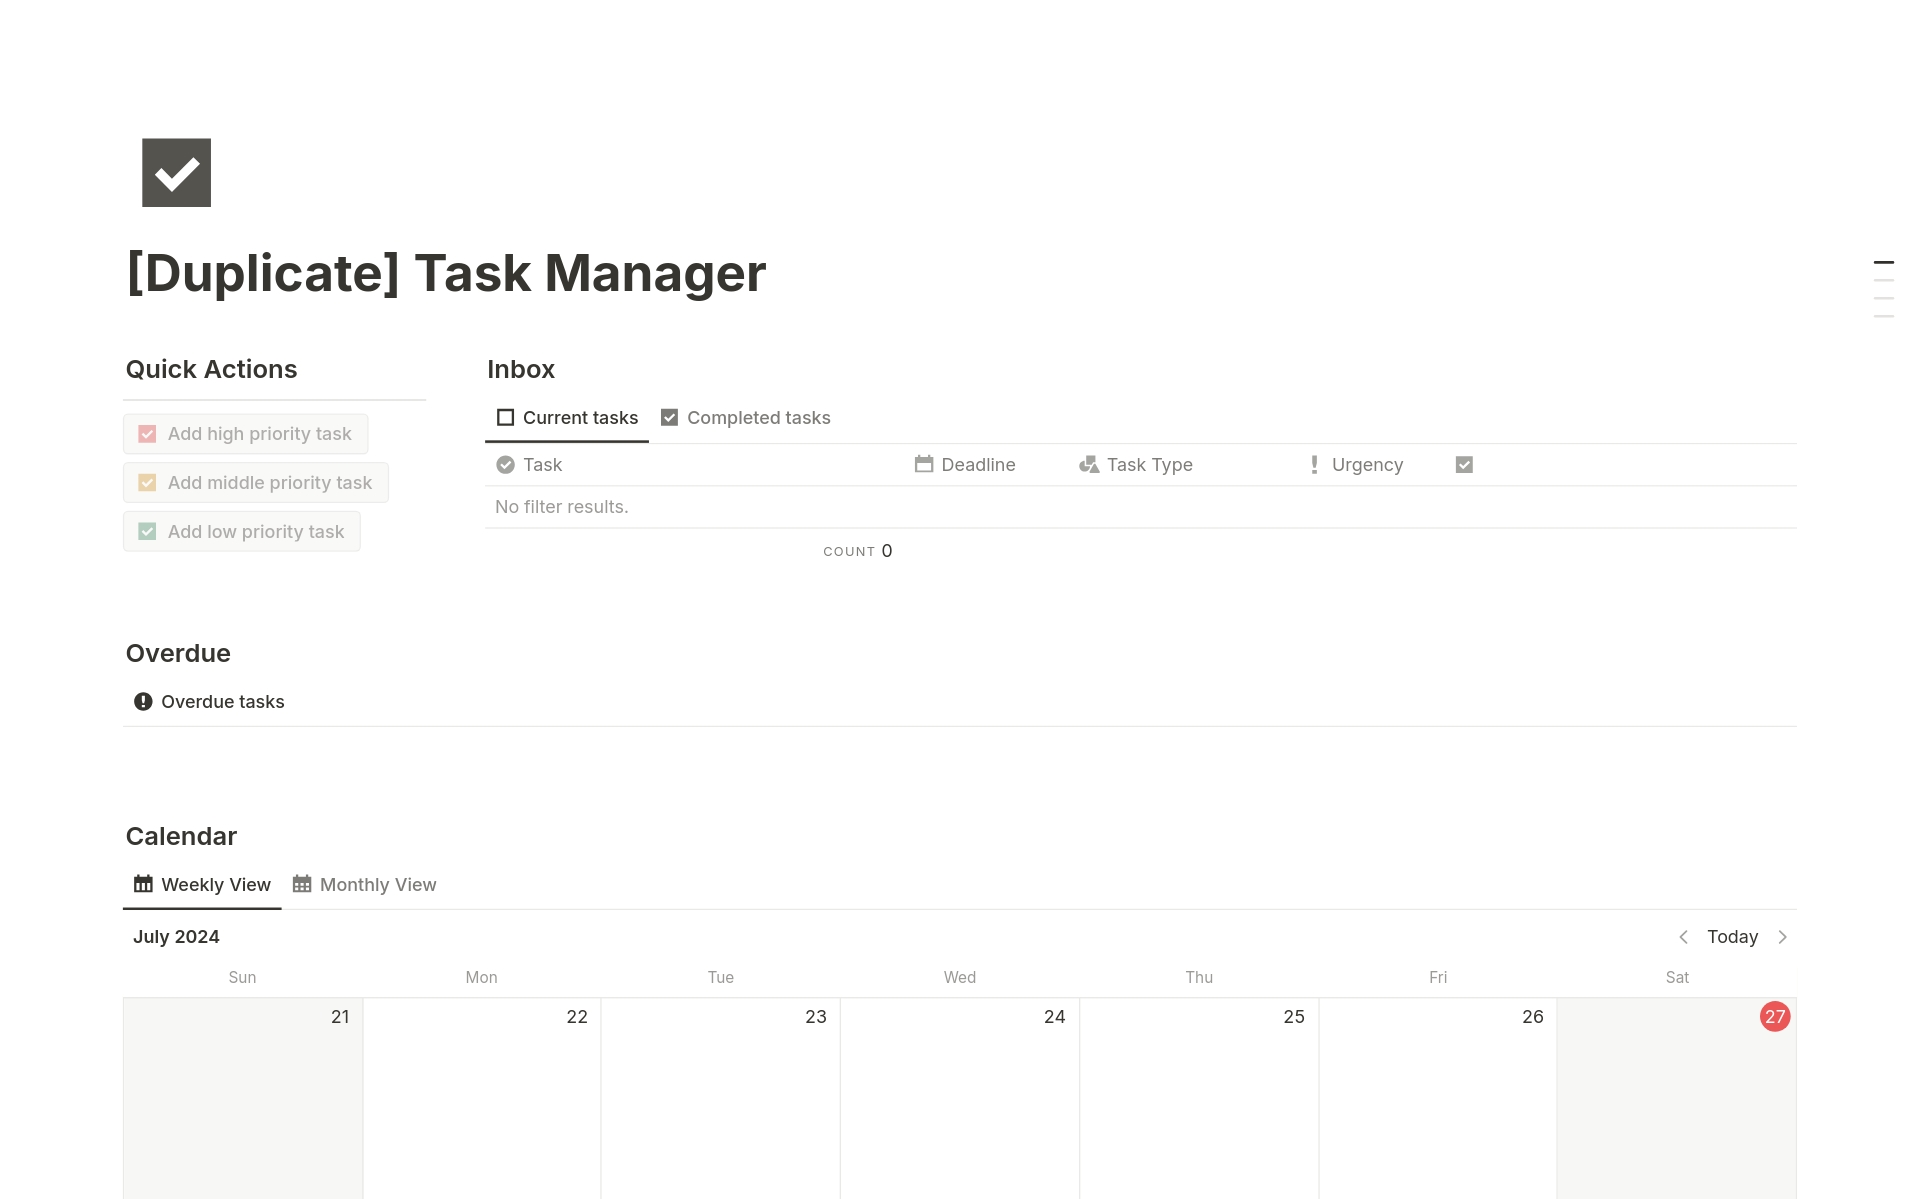 Manage all your tasks in one place
